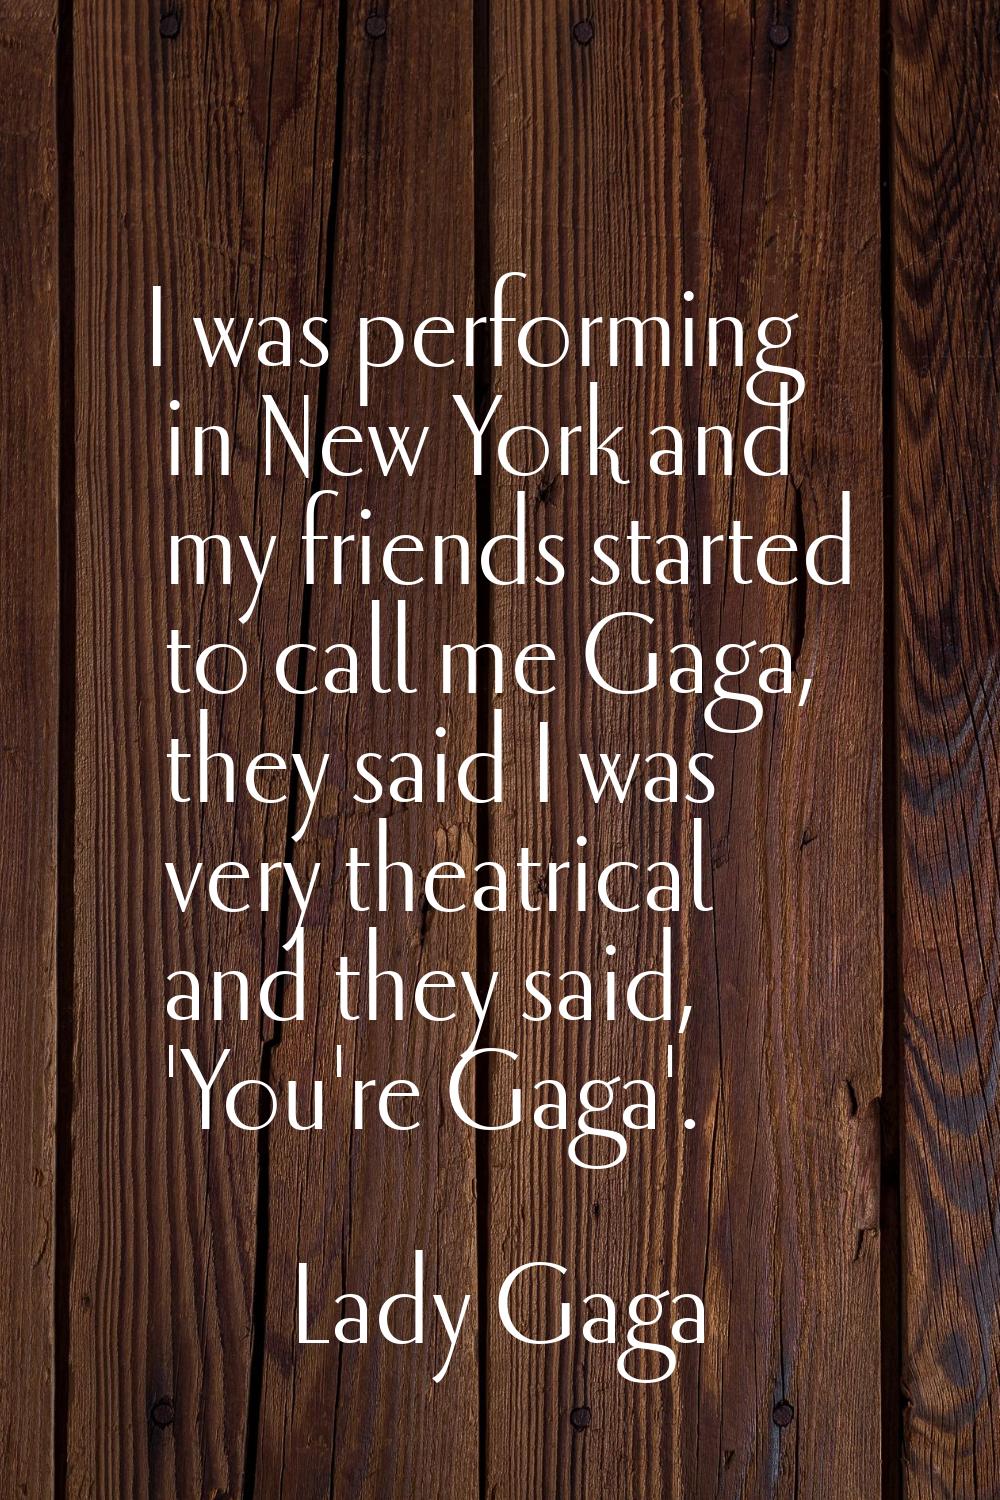 I was performing in New York and my friends started to call me Gaga, they said I was very theatrica